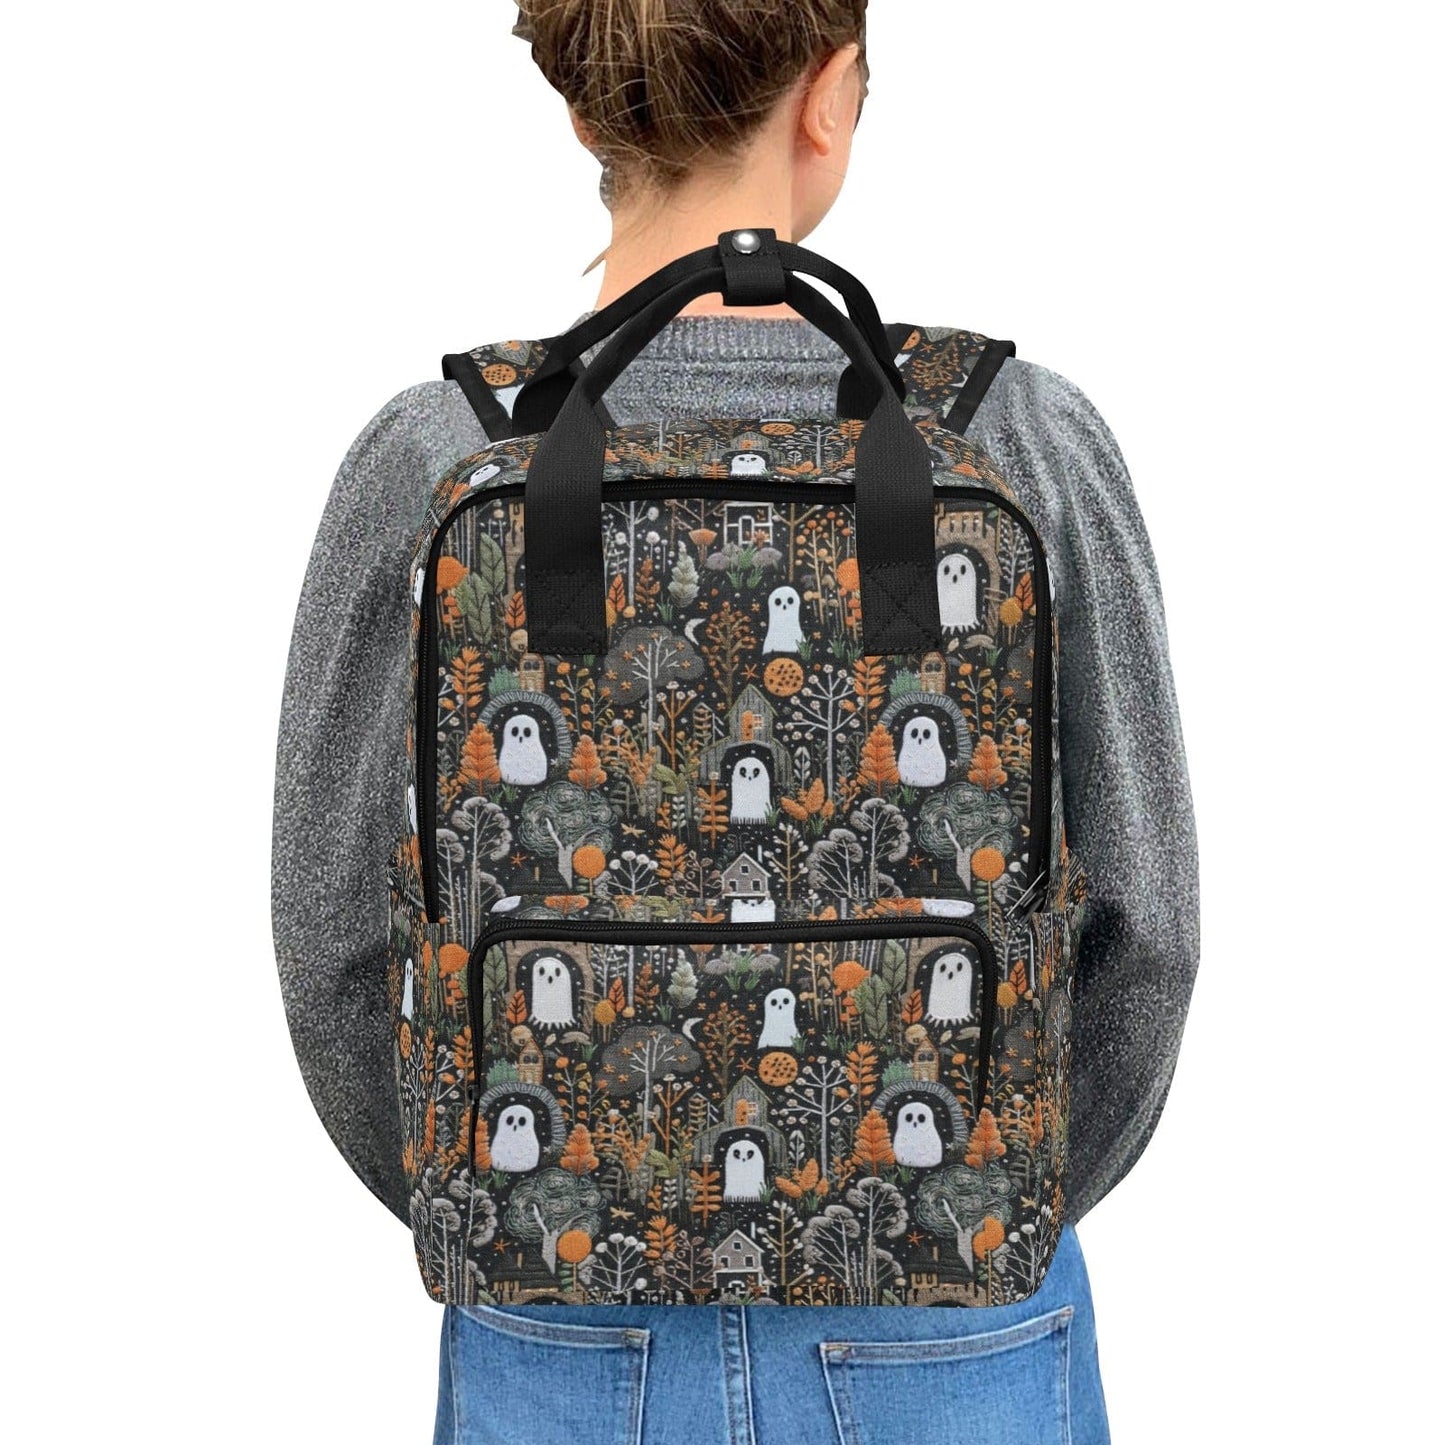 Ghostly House Double Handle Backpack